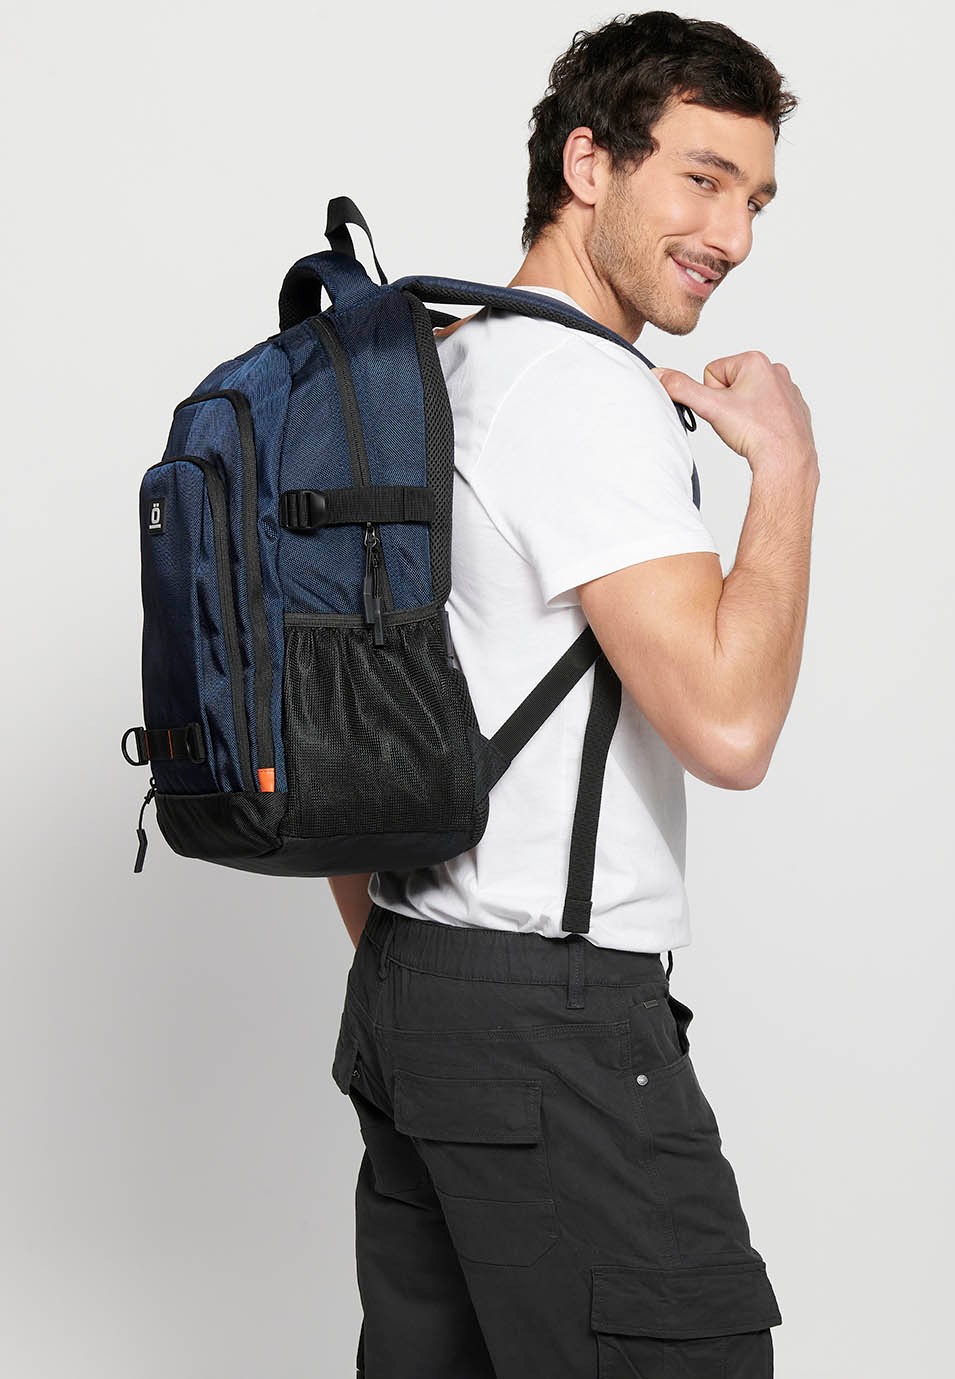 Koröshi backpack with three zippered compartments, one for a laptop, with Navy interior pockets 6